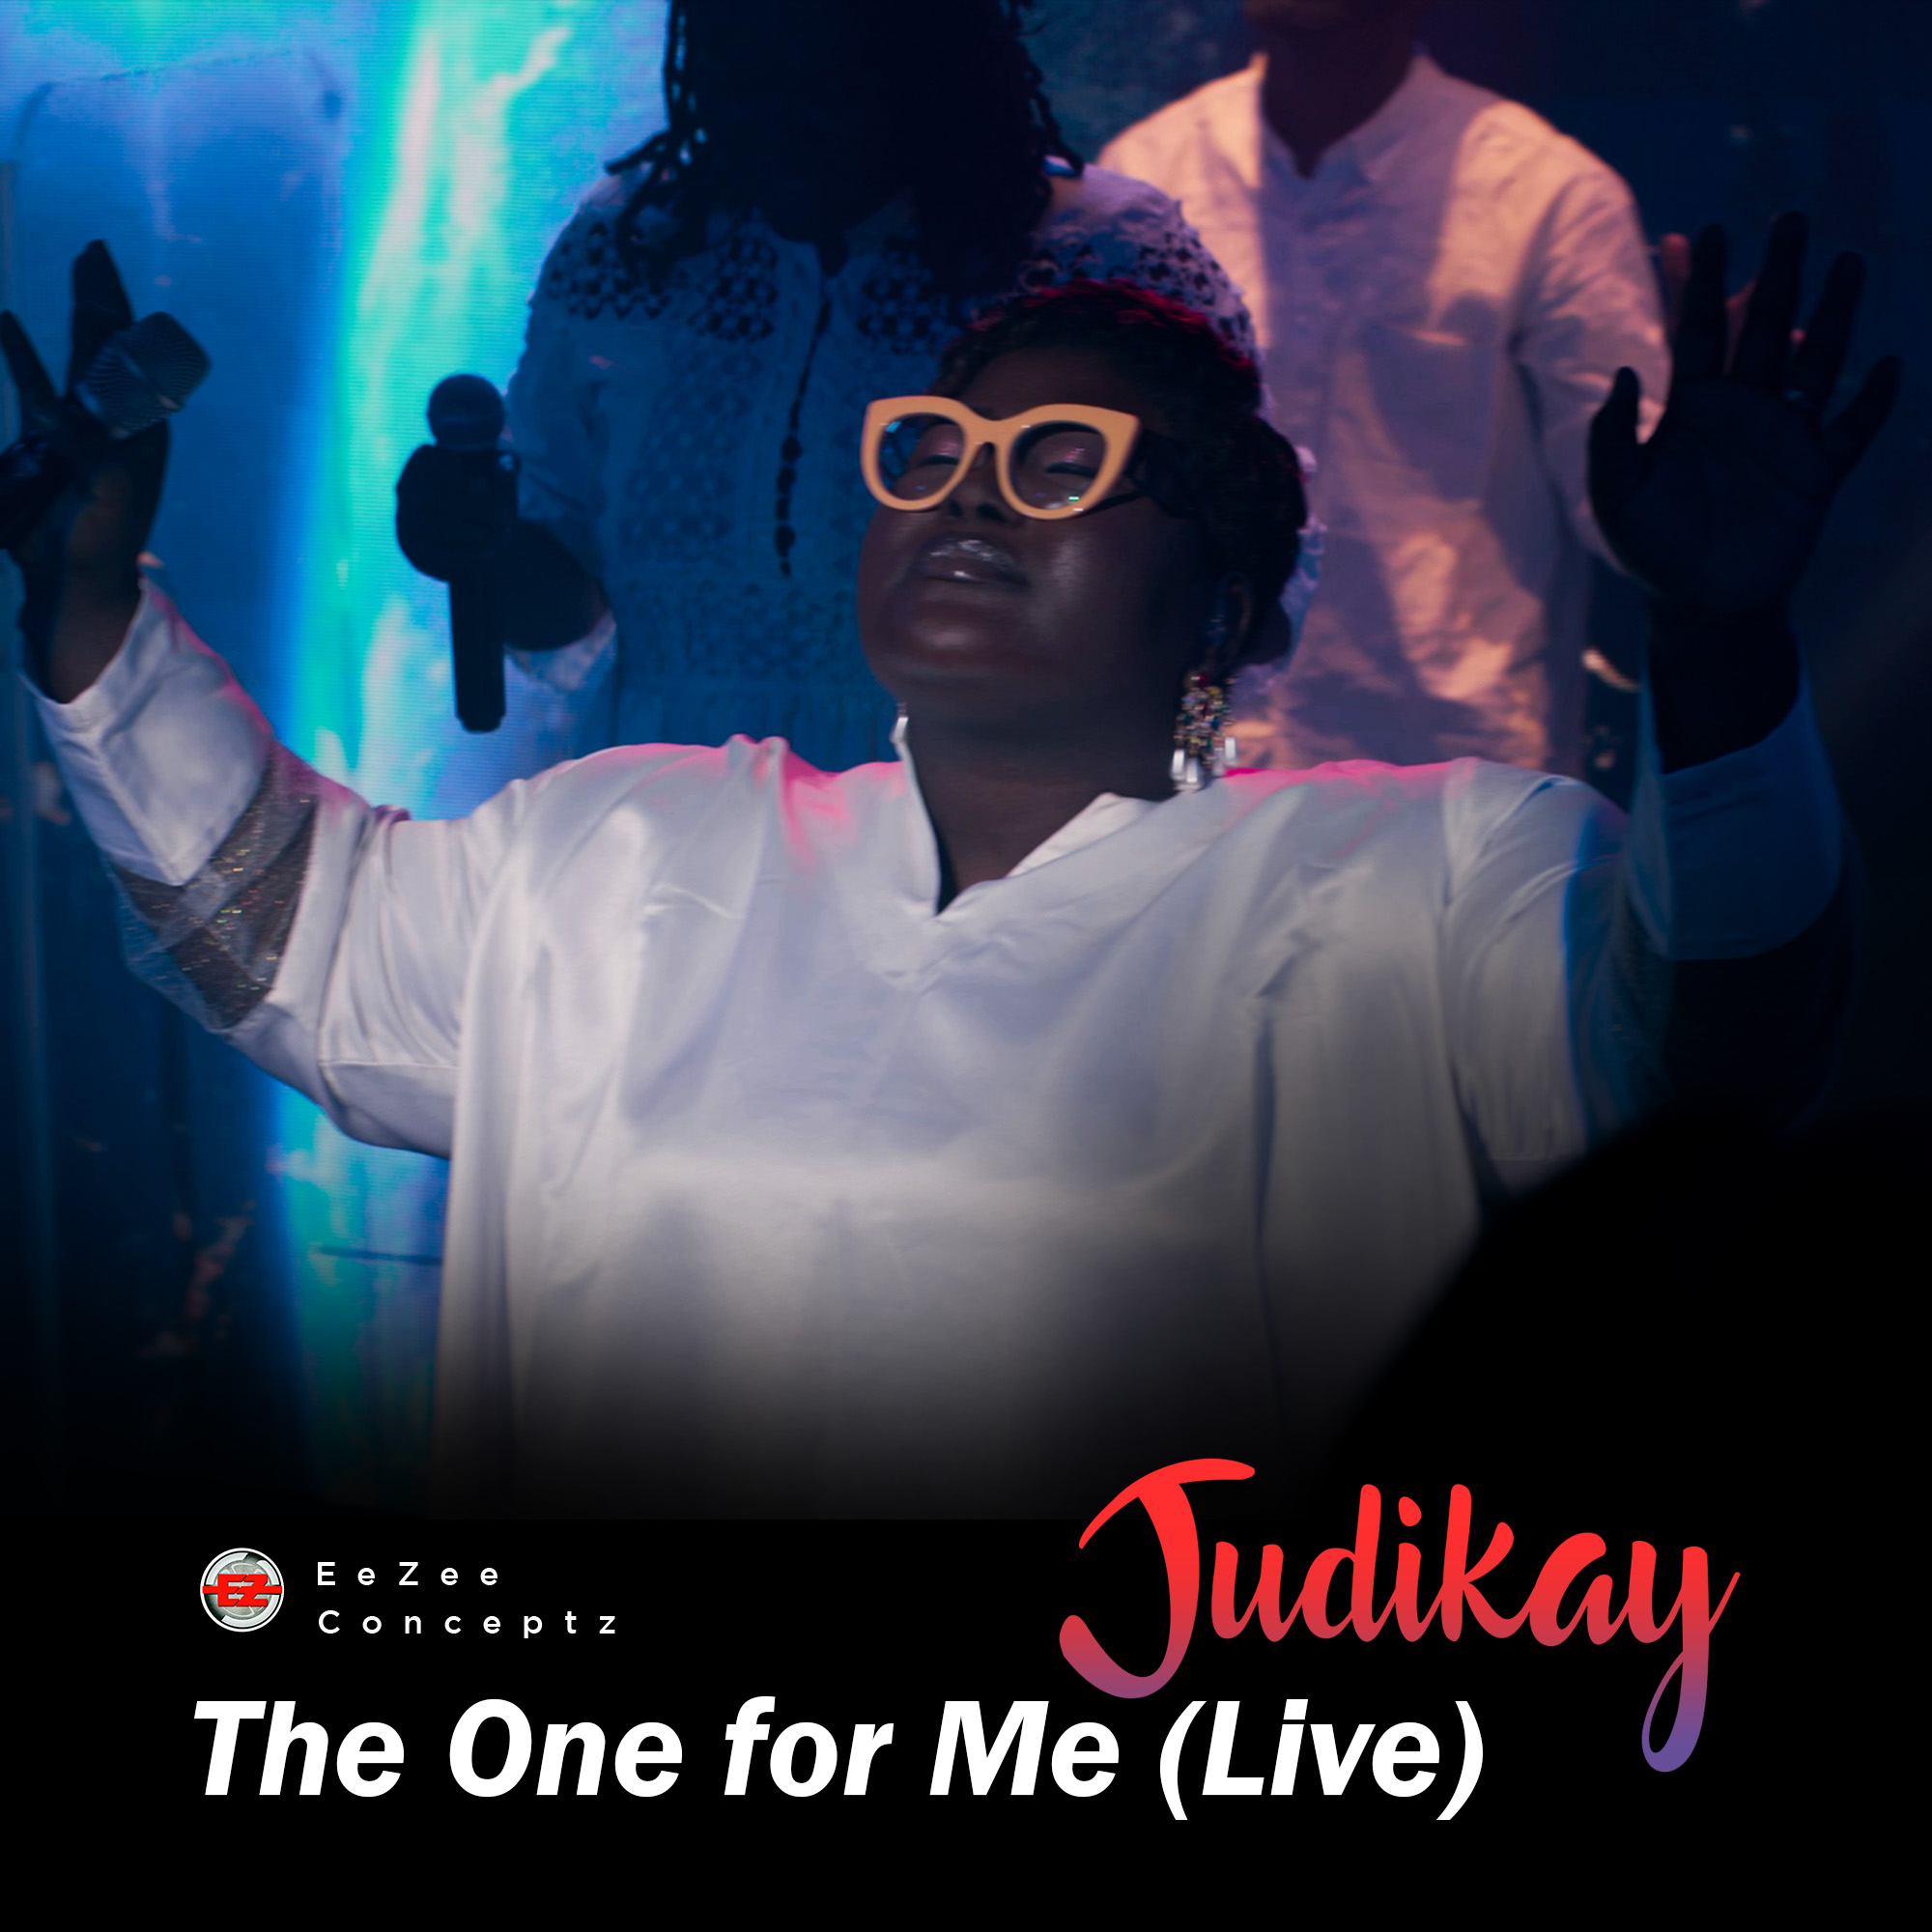 Judikay - The One for Me Live